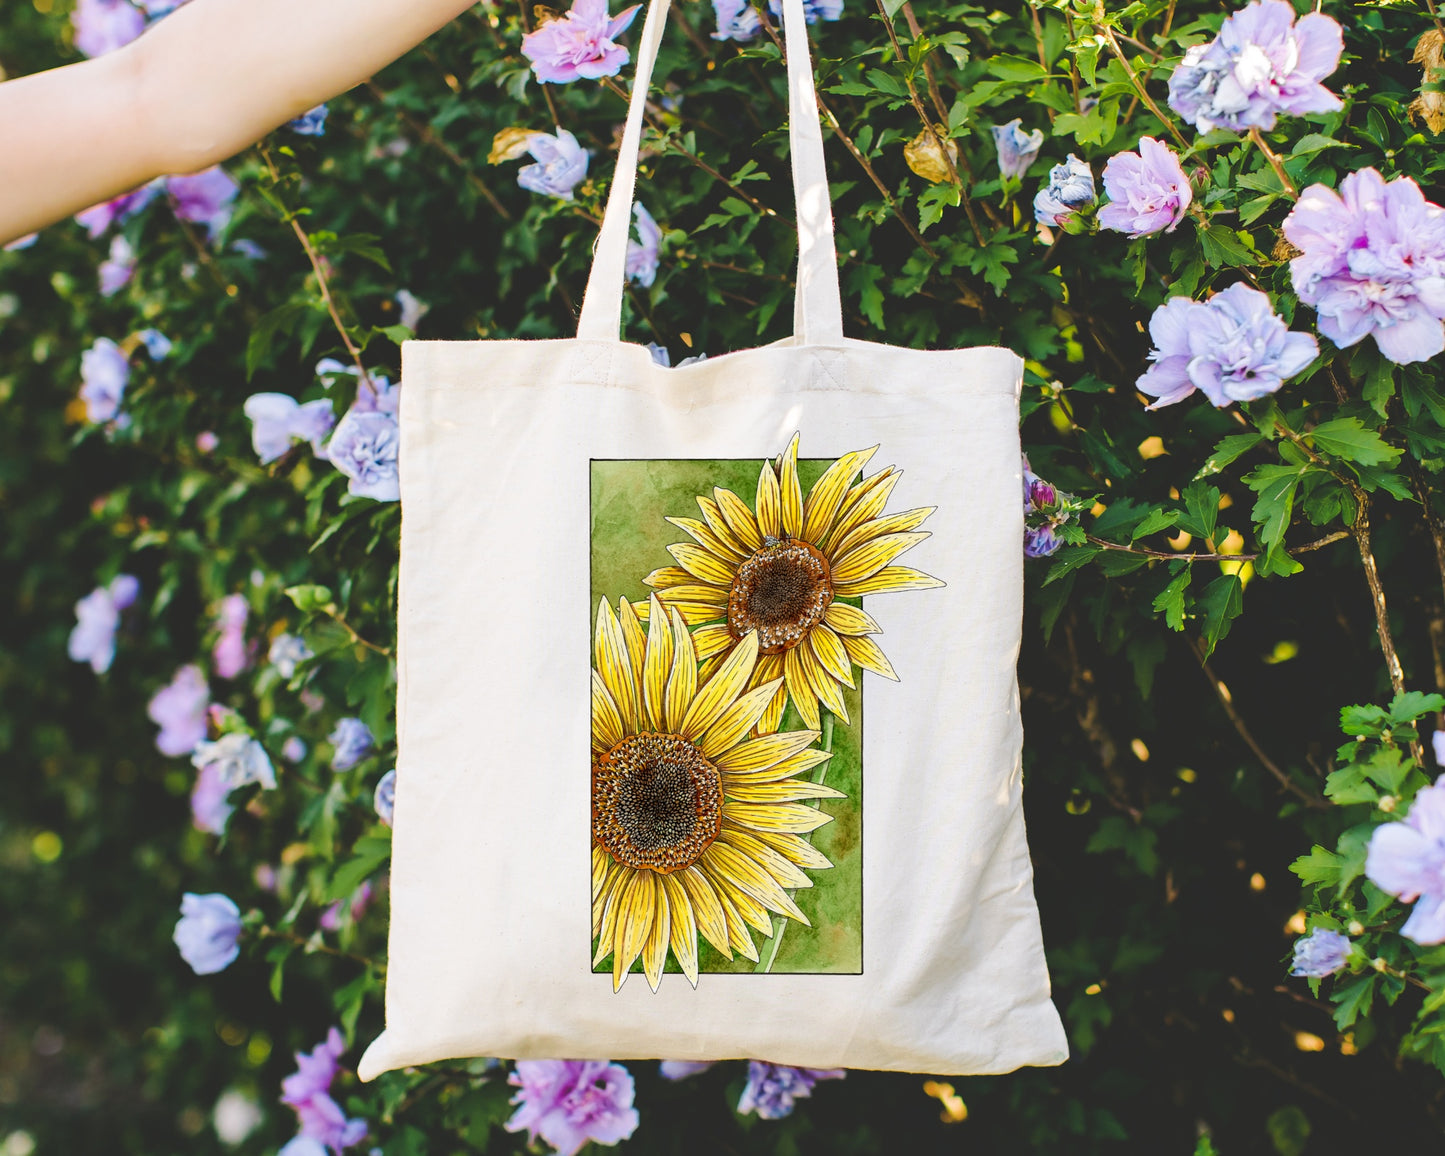 Sunflowers Tote Bag